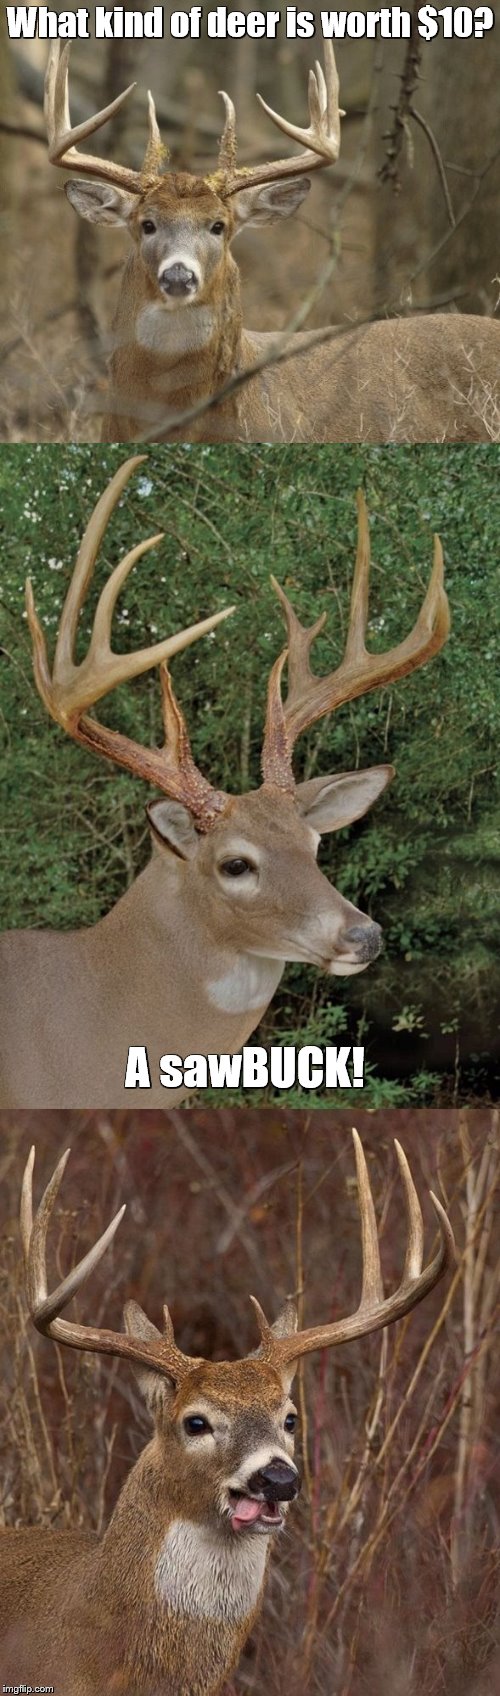 Bad Pun Buck | What kind of deer is worth $10? A sawBUCK! | image tagged in bad pun buck | made w/ Imgflip meme maker